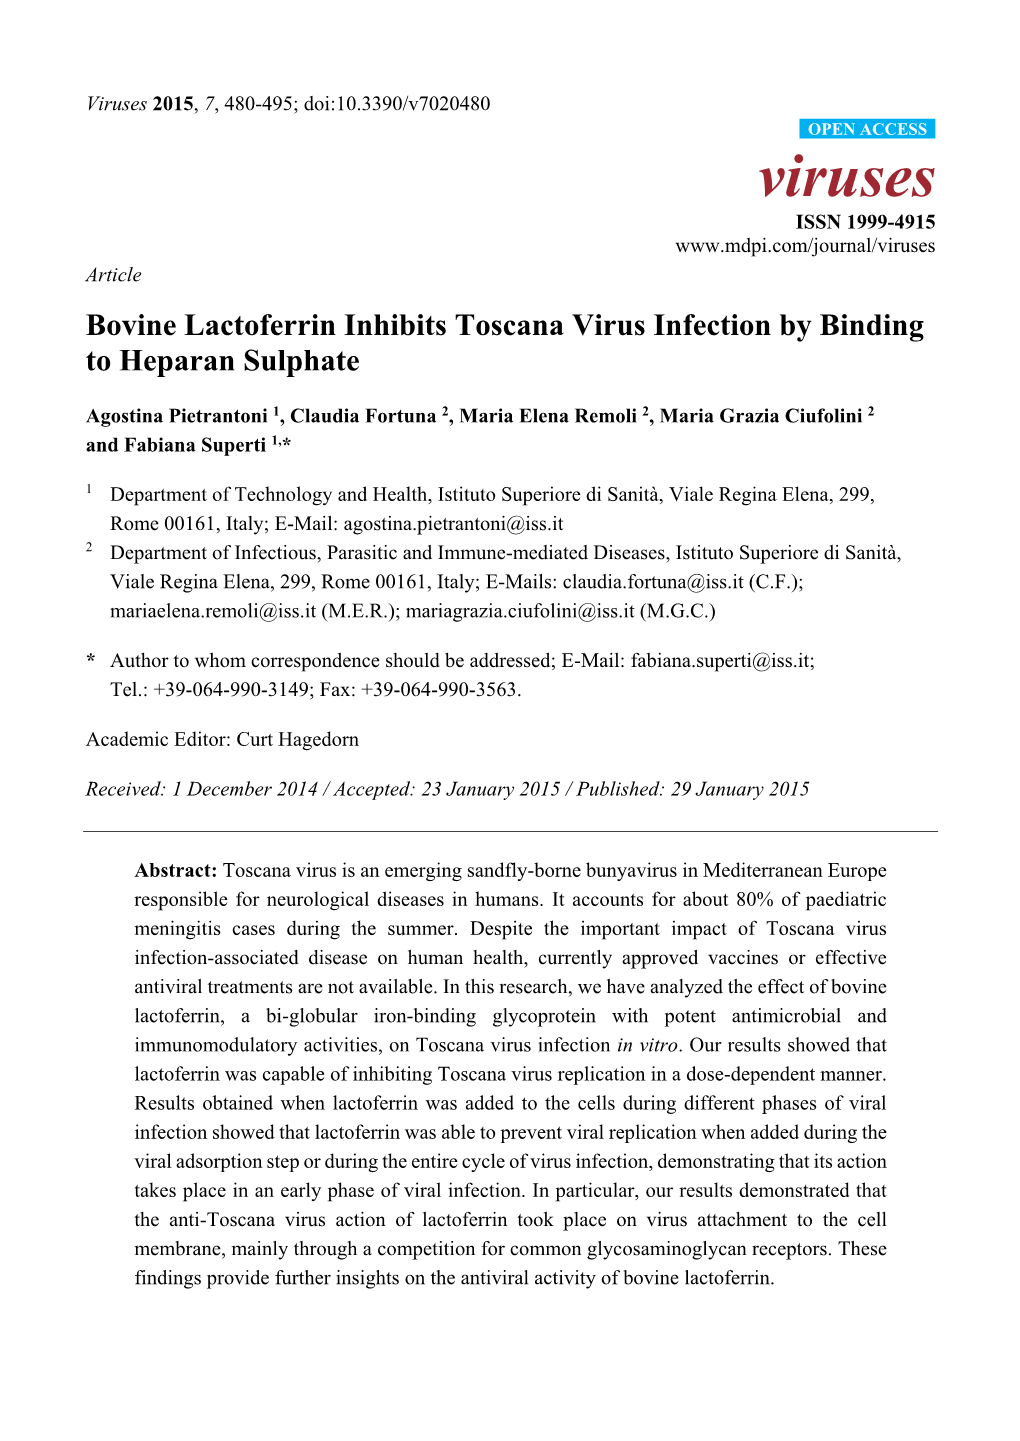 Bovine Lactoferrin Inhibits Toscana Virus Infection by Binding to Heparan Sulphate